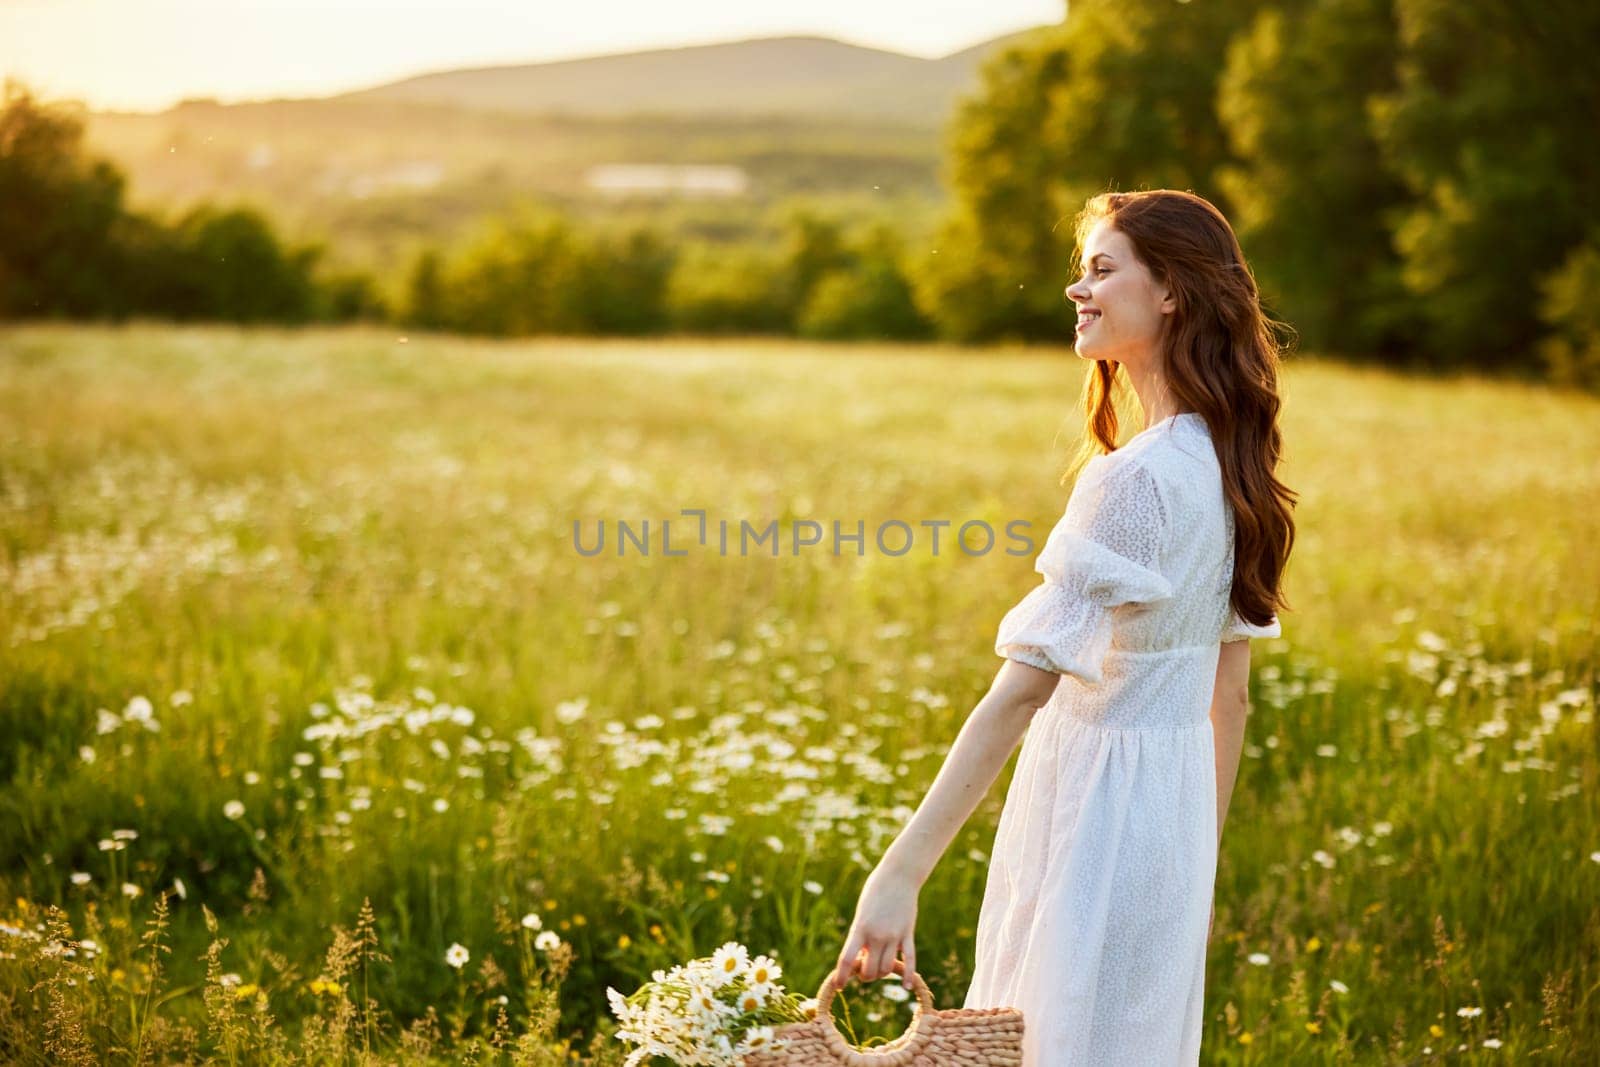 happy woman in a light dress and a wicker basket full of daisies enjoys nature walking in the field by Vichizh